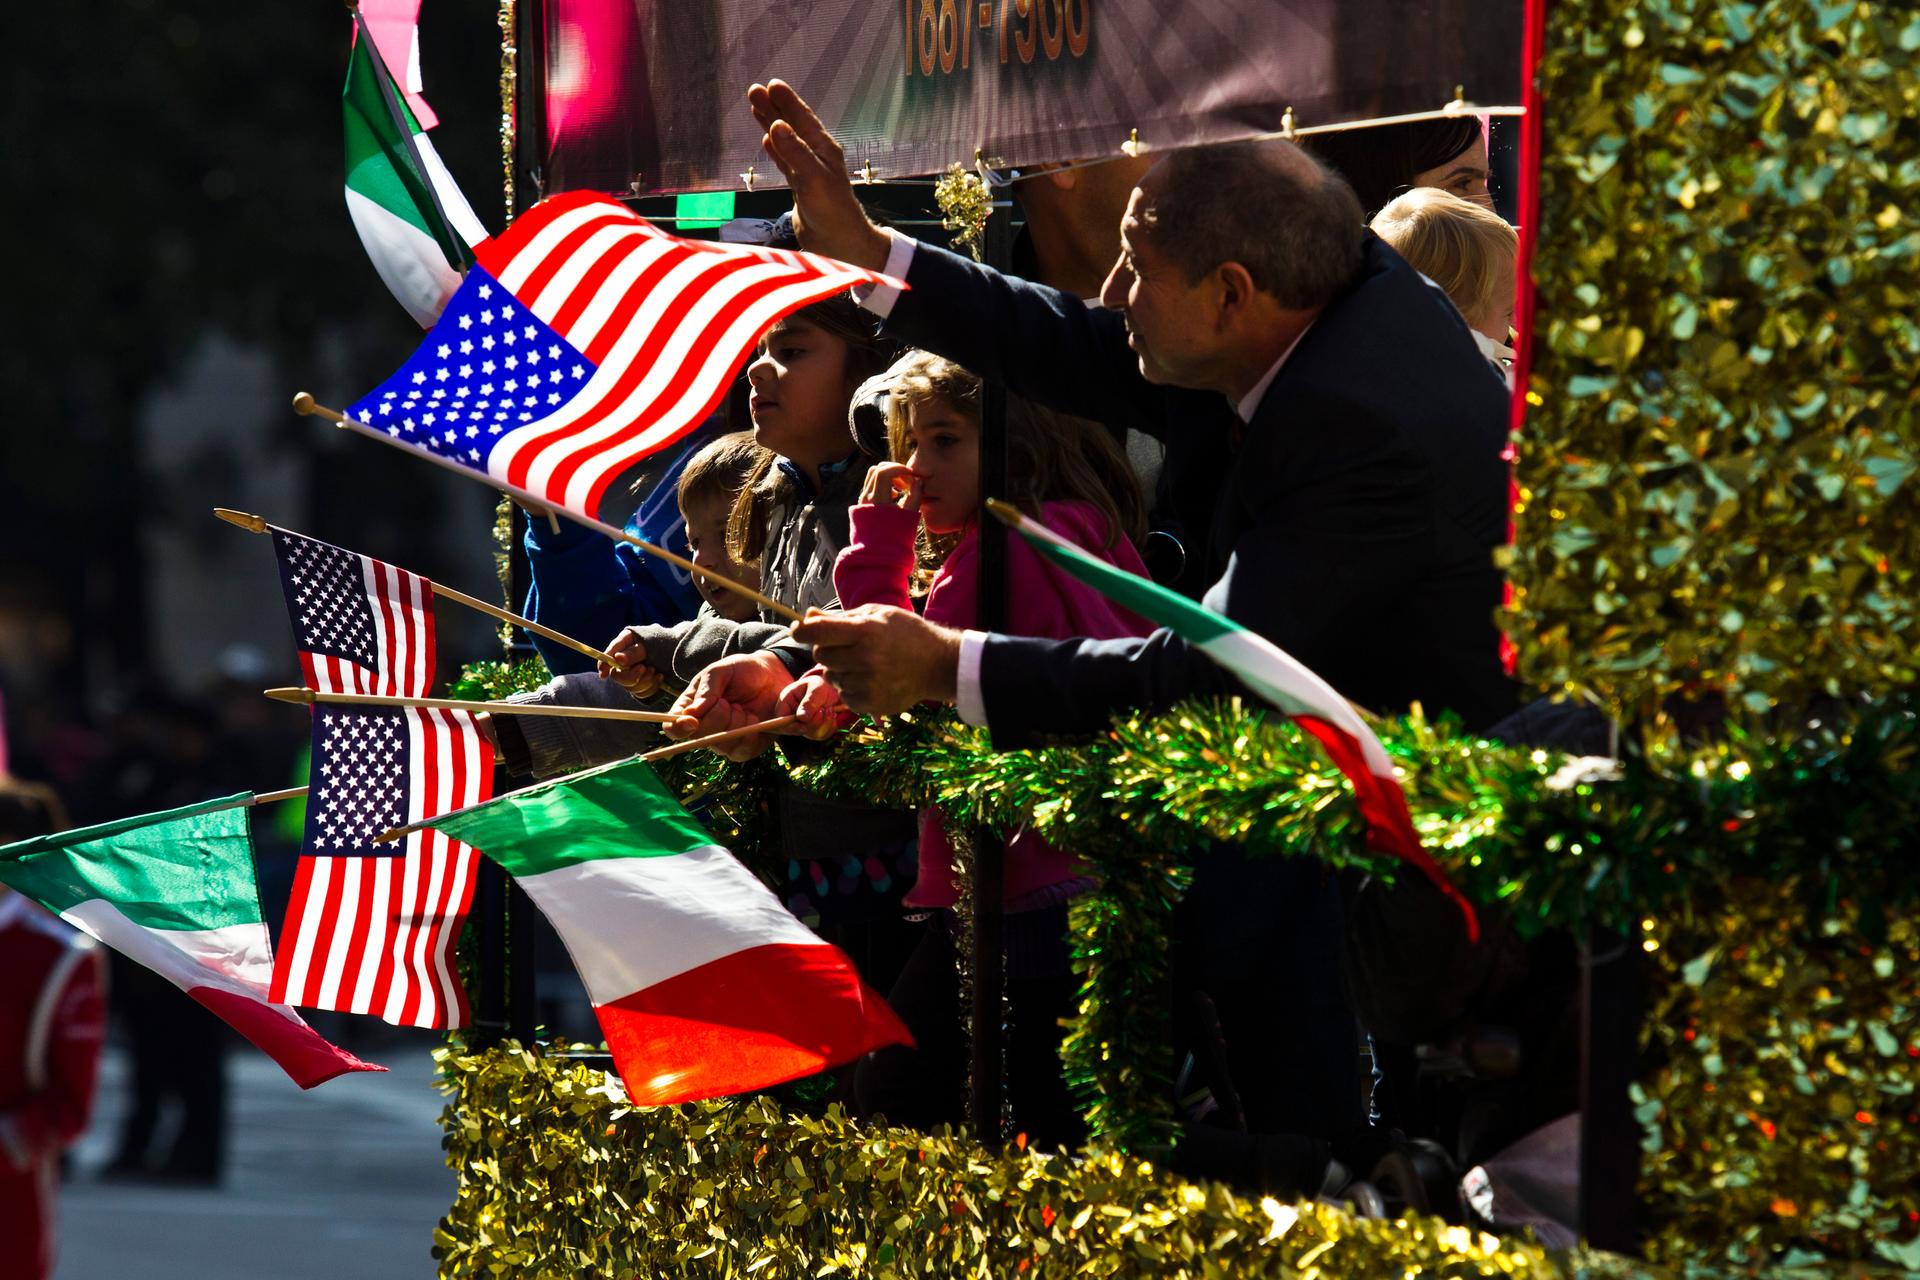 People take part in the 69th Annual Columbus Day Parade in New York in 2013.